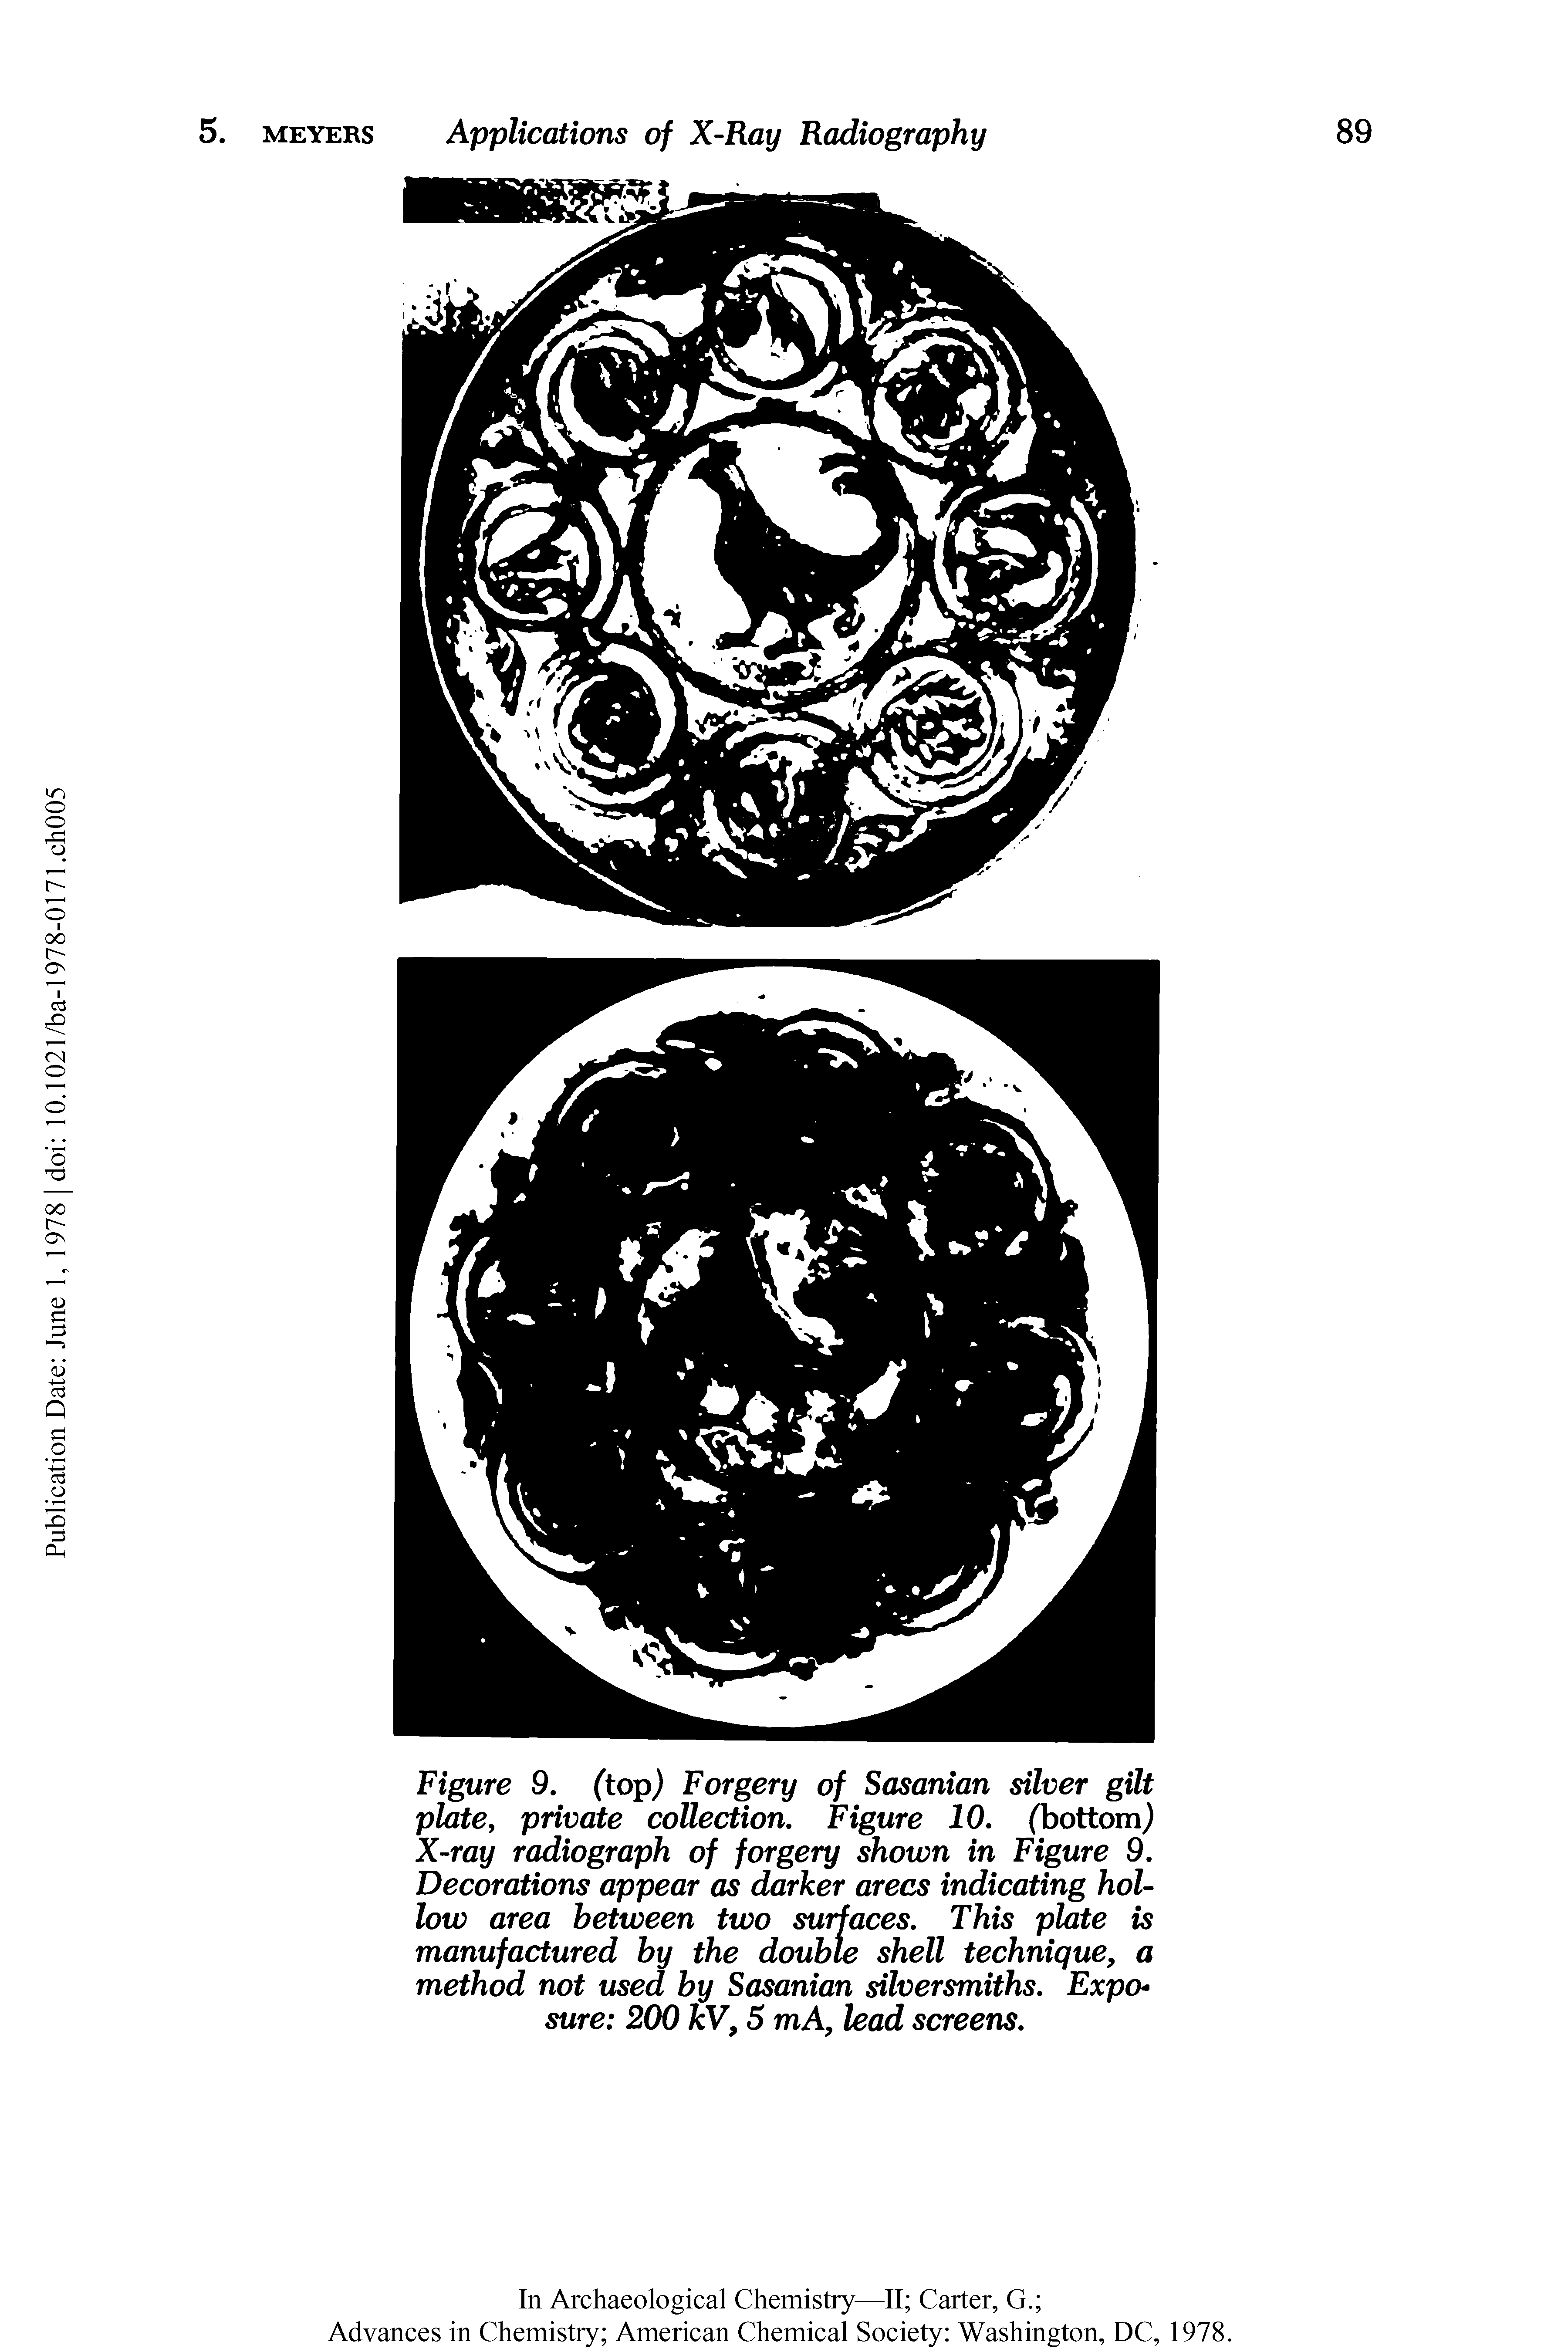 Figure 9. (top) Forgery of Sasanian silver gilt plate, private collection. Figure 10. (Tjottomj X-ray radiograph of forgery shown in Figure 9. Decorations appear as darker areas indicating hollow area between two surfaces. This plate is manufactured by the double shell technique, a method not used by Sasanian silversmiths. Exposure 200 kV, 5 mA, lead screens.